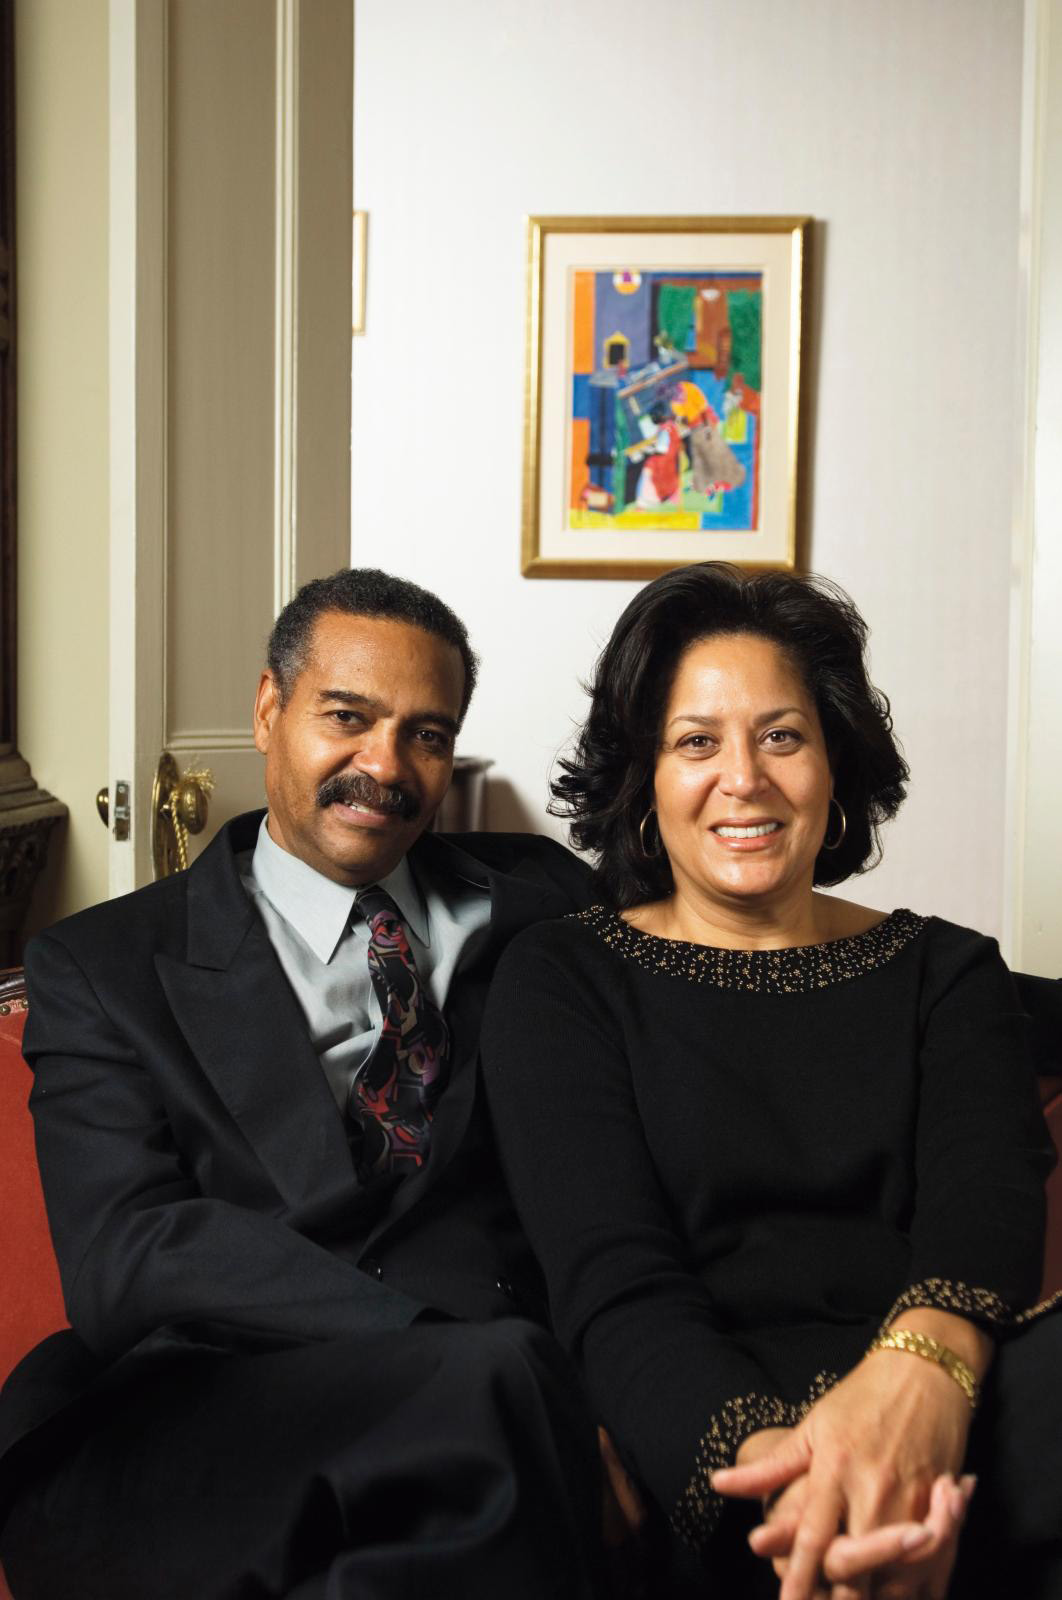 Walter and Linda Evans, Committed to African-American Art